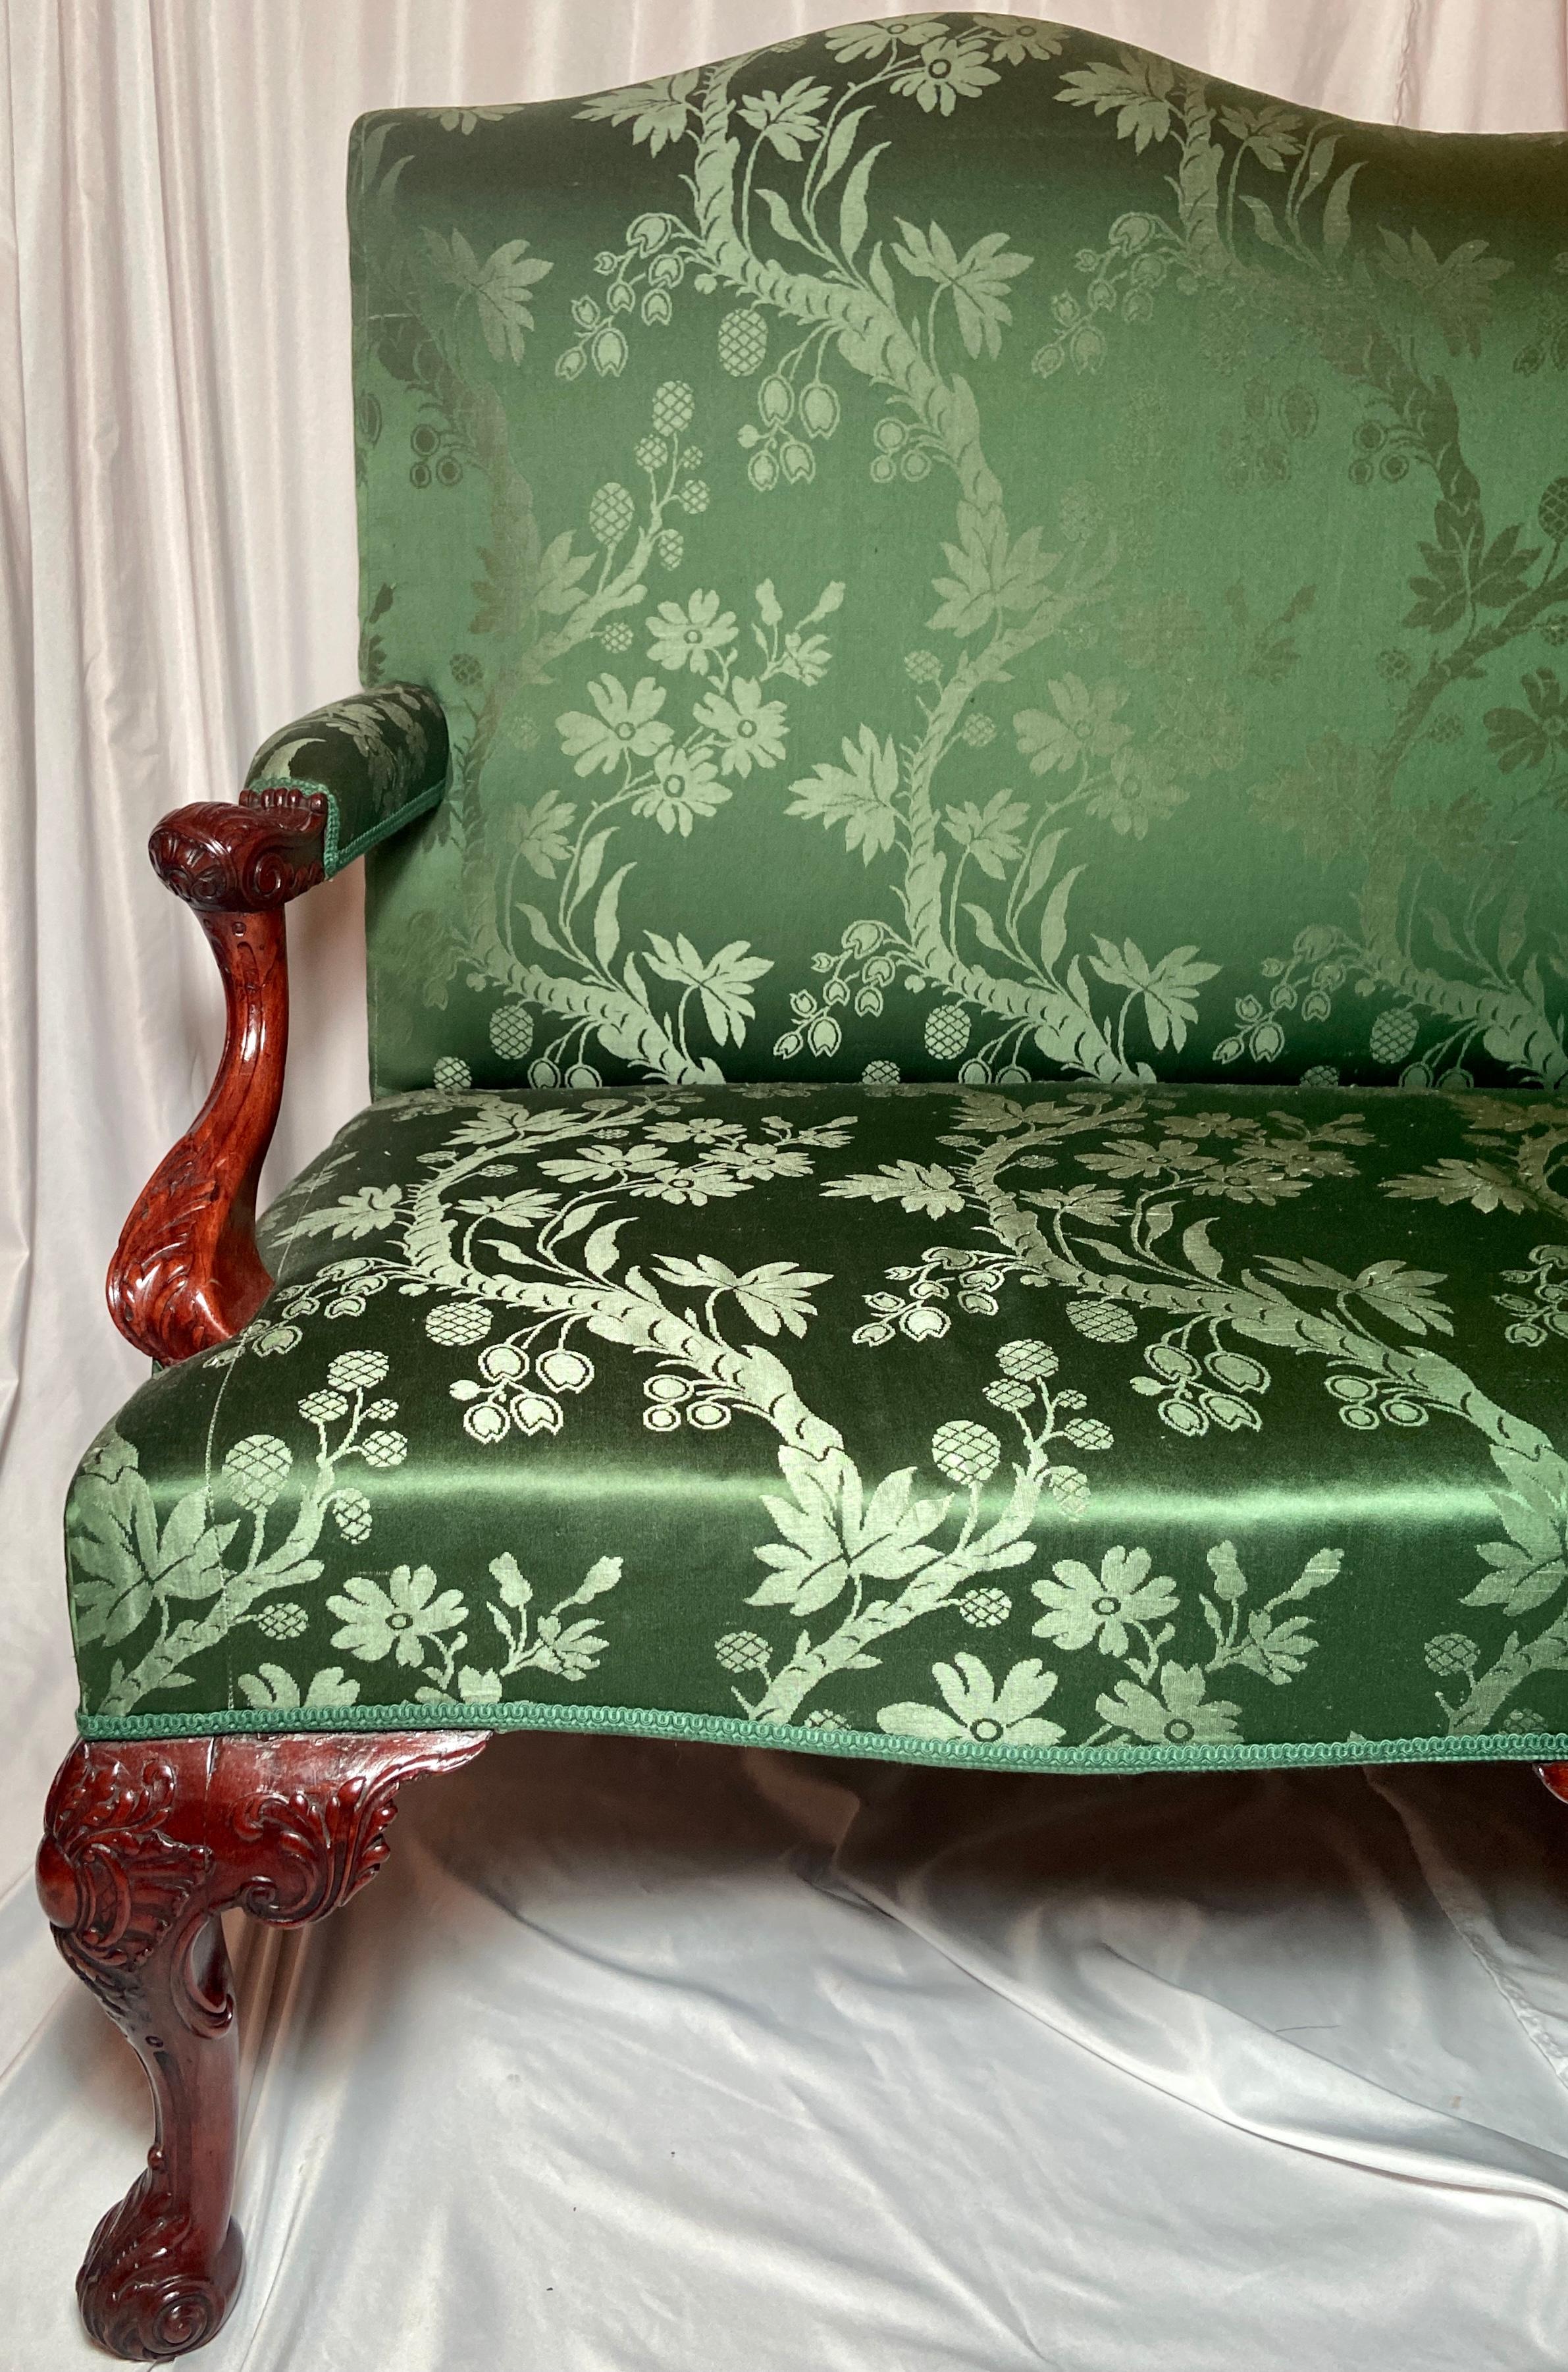 Antique English George III green upholstered mahogany settee, Circa 1790-1820. (New Upholstery).